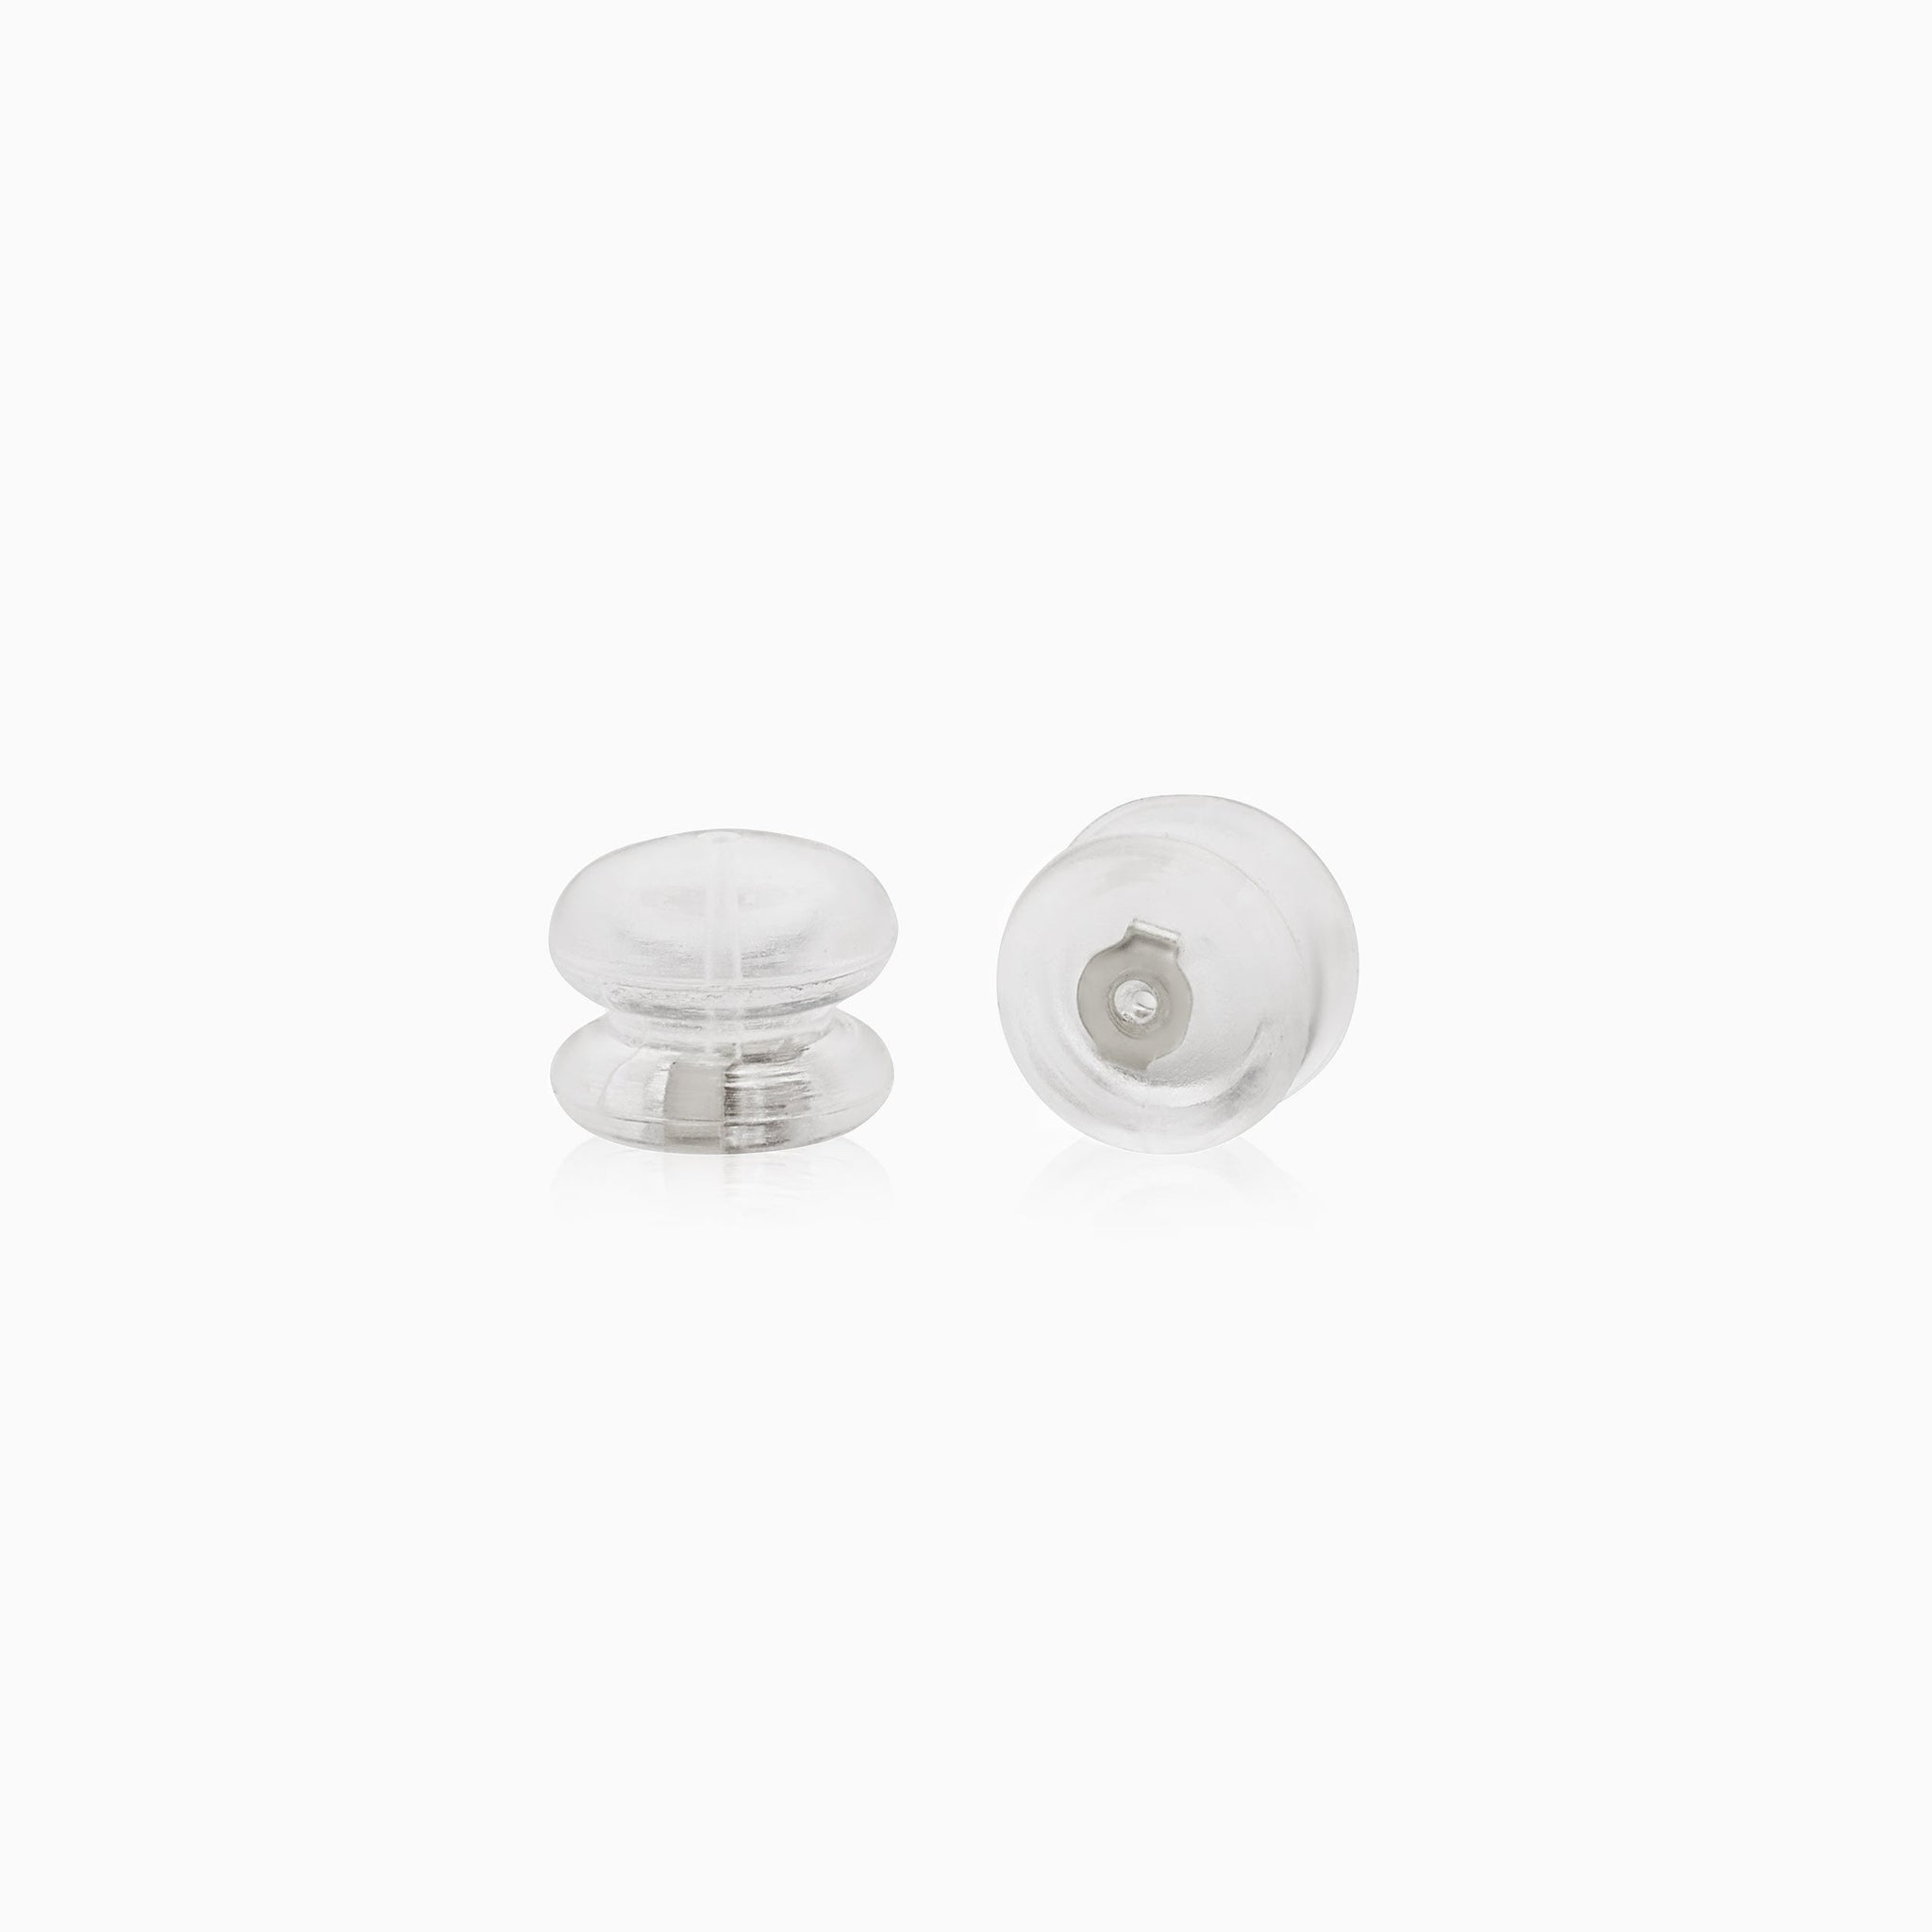 Clear Silicone Earring Backs